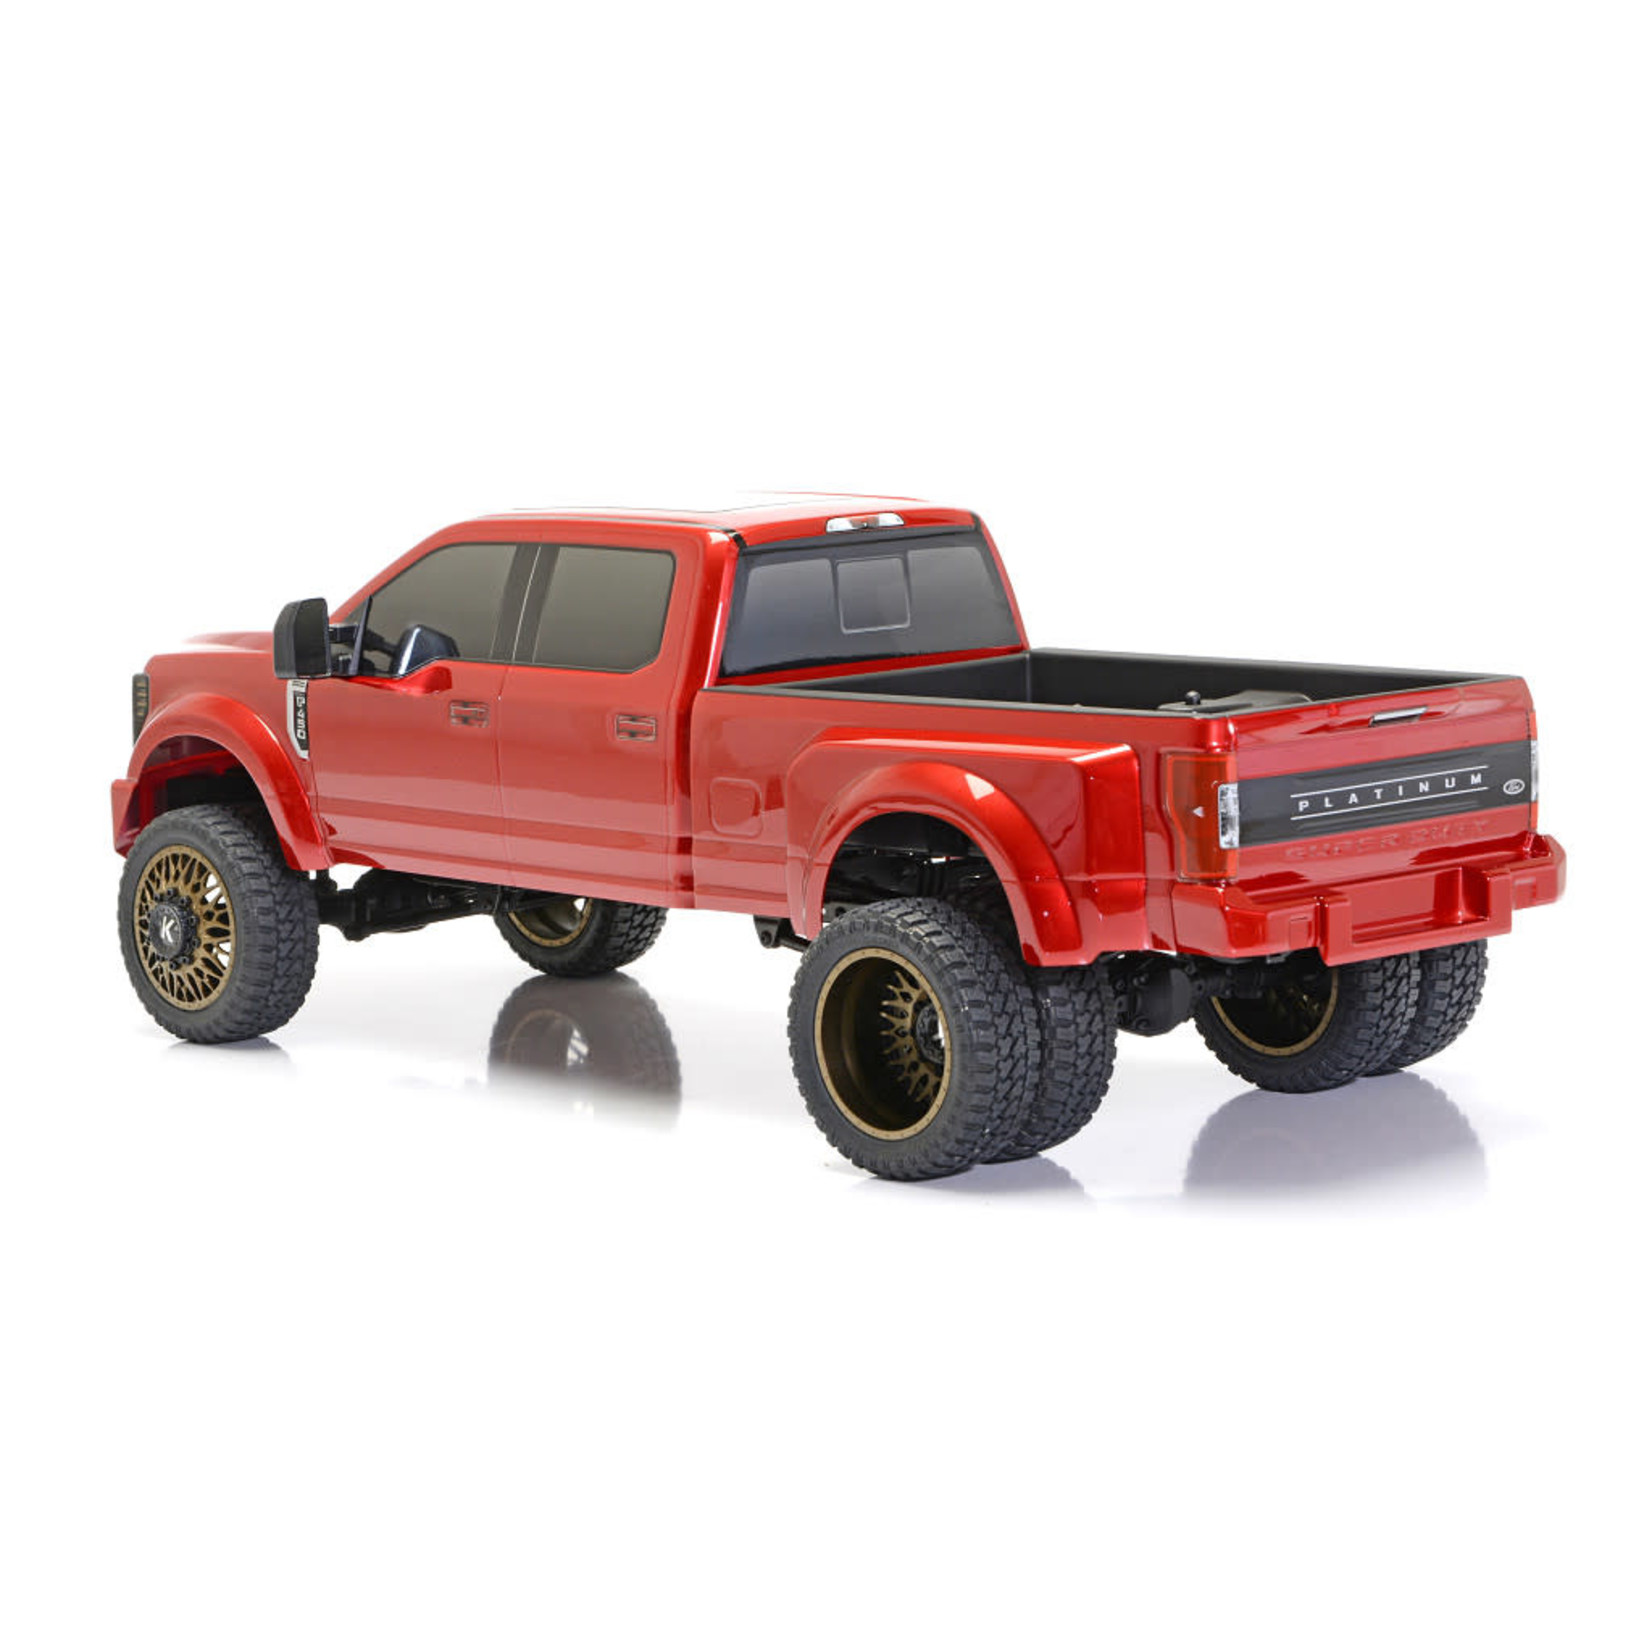 CEN Racing CEN Ford F450 SD KG1 Edition 1/10 RTR Custom Dually Truck (Candy Apple Red) w/2.4GHz Radio #8982